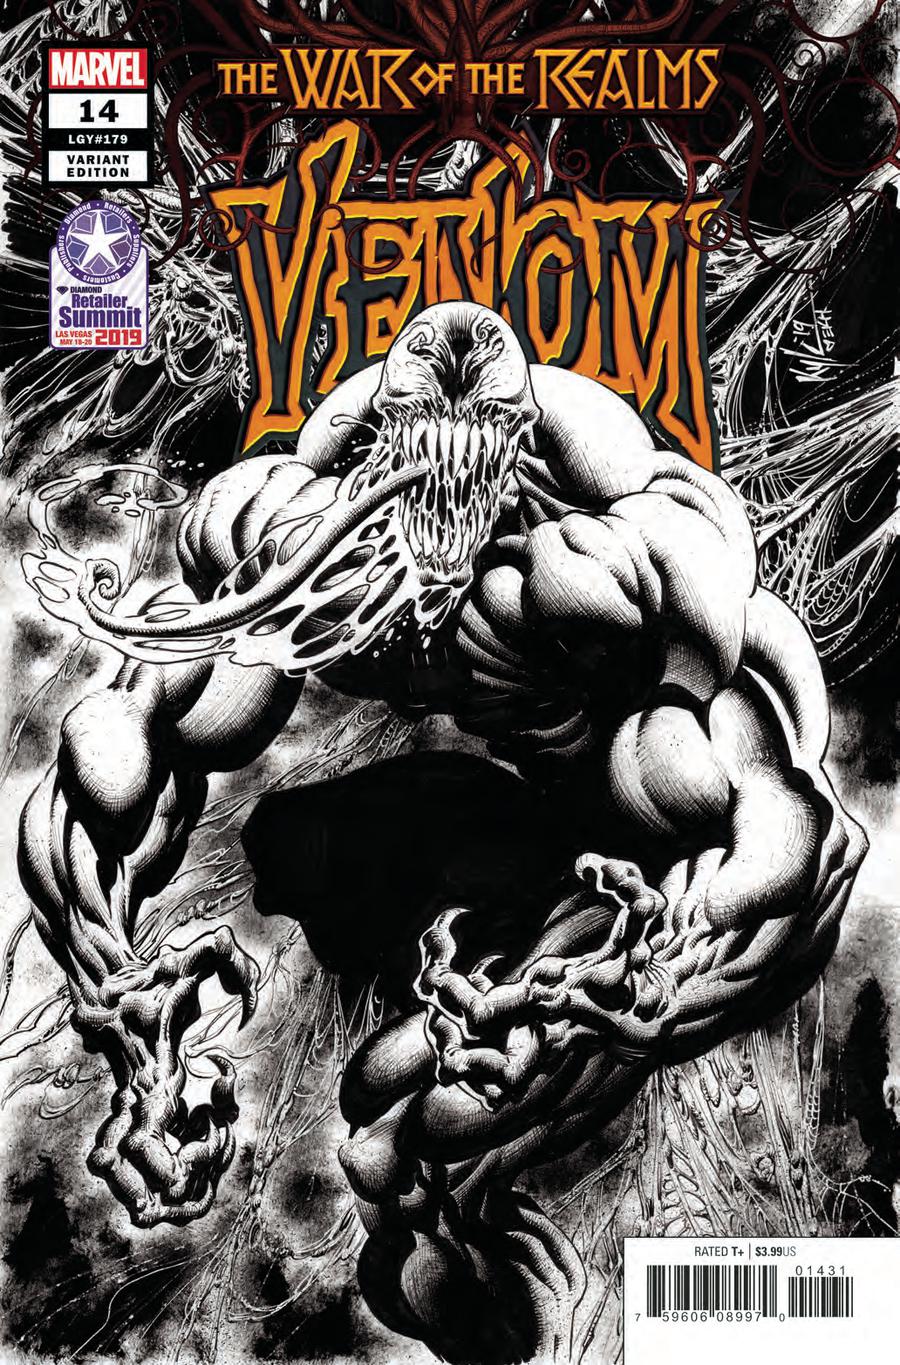 Venom Vol 4 #14 Cover C Variant Kyle Hotz Retailer Summit 2019 Cover (War Of The Realms Tie-In)